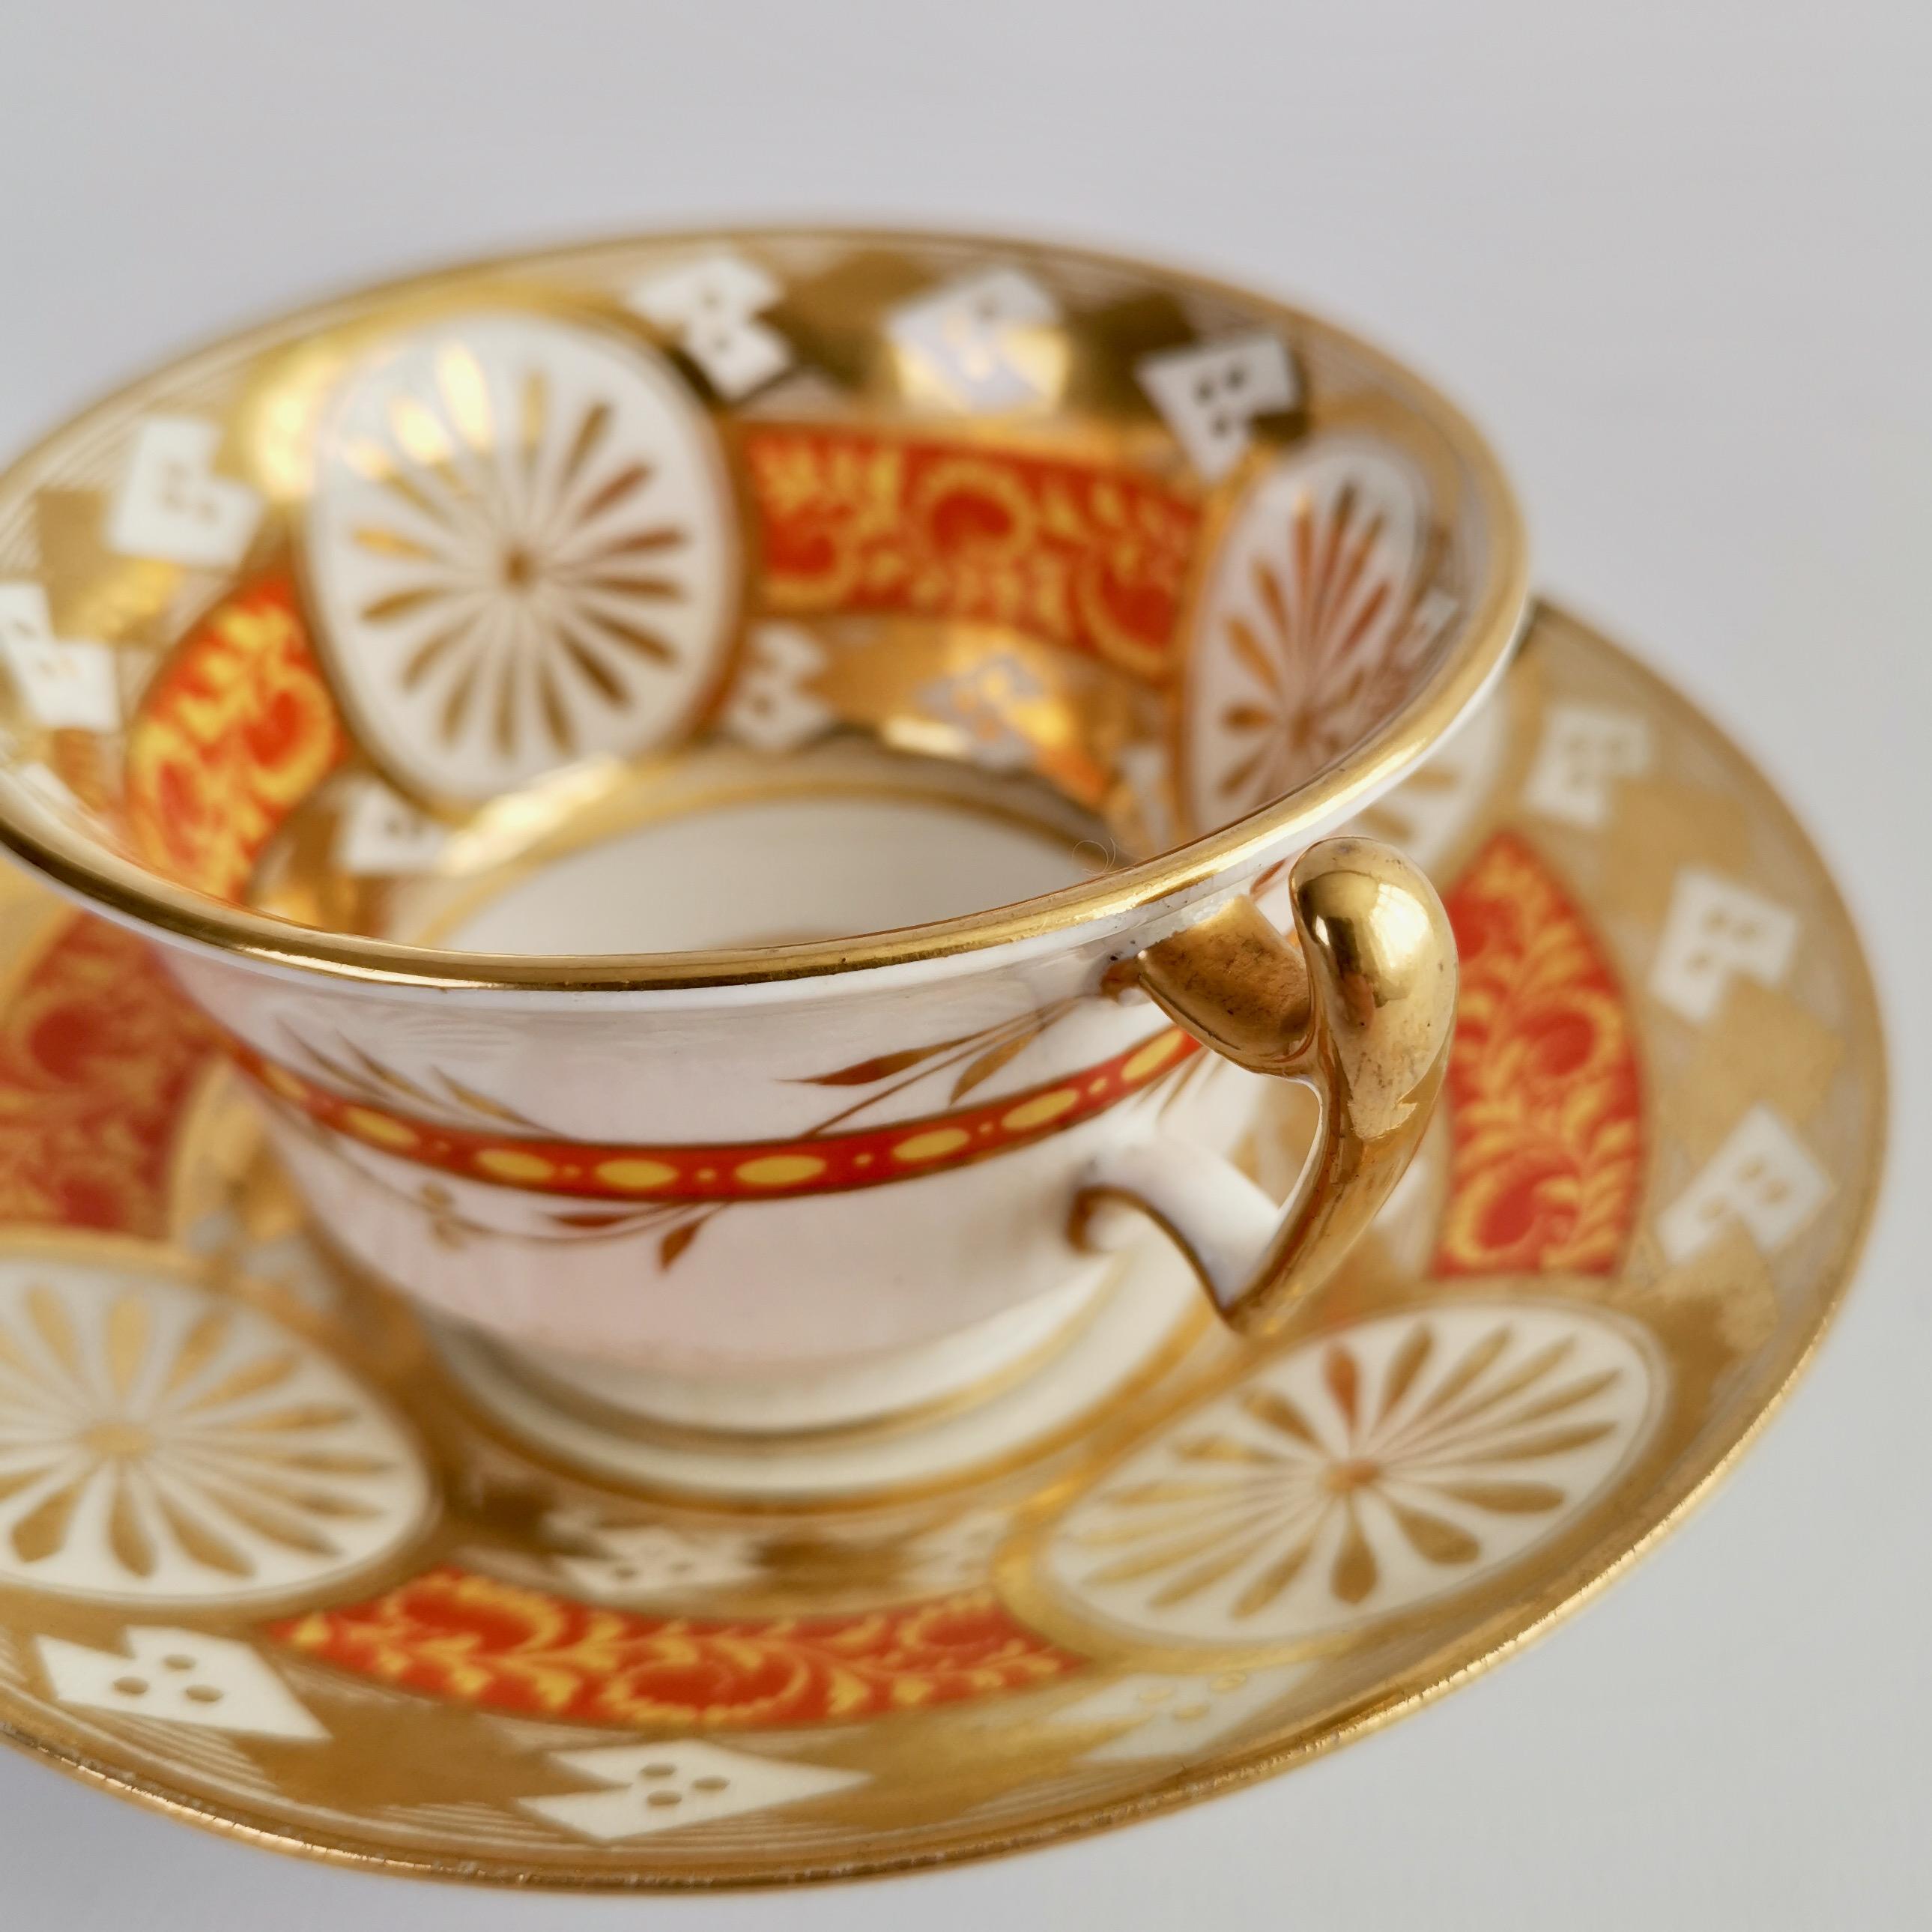 Early 19th Century Anstice, Horton & Rose Teacup, Geometric Gilt, Yellow and Red, Regency